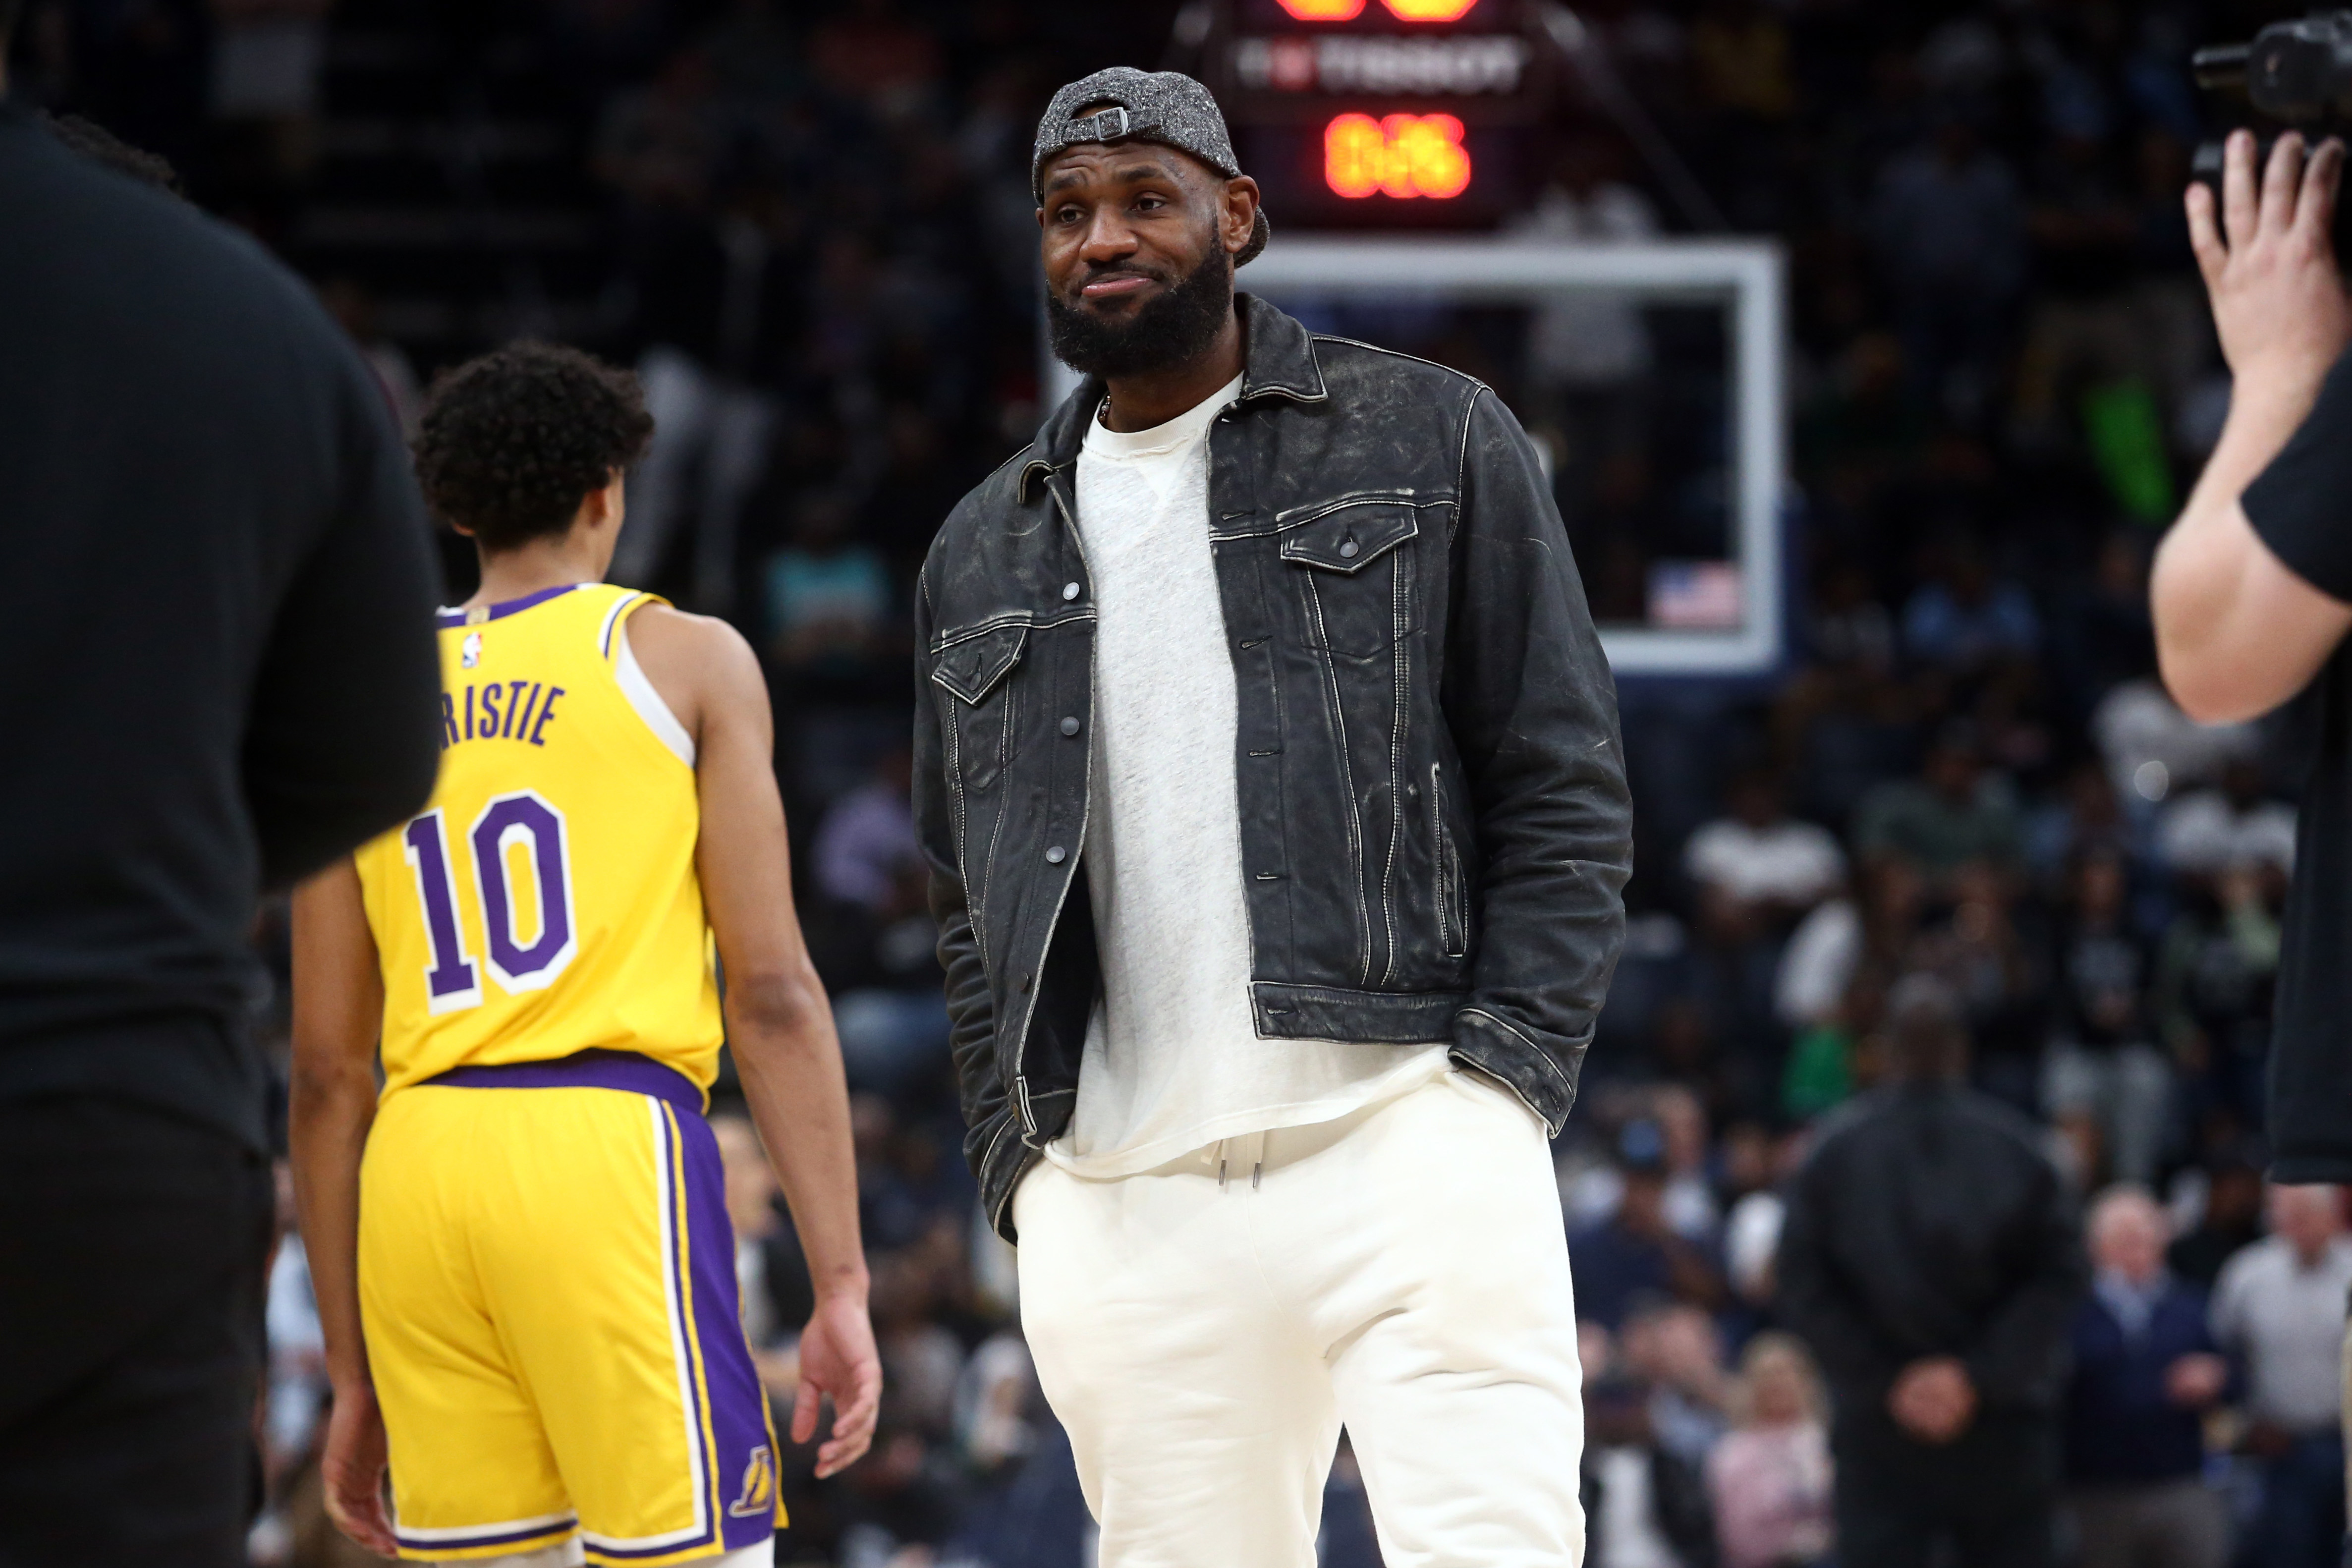 LeBron James out for at least 3 weeks with foot injury, Lakers to reevaluate